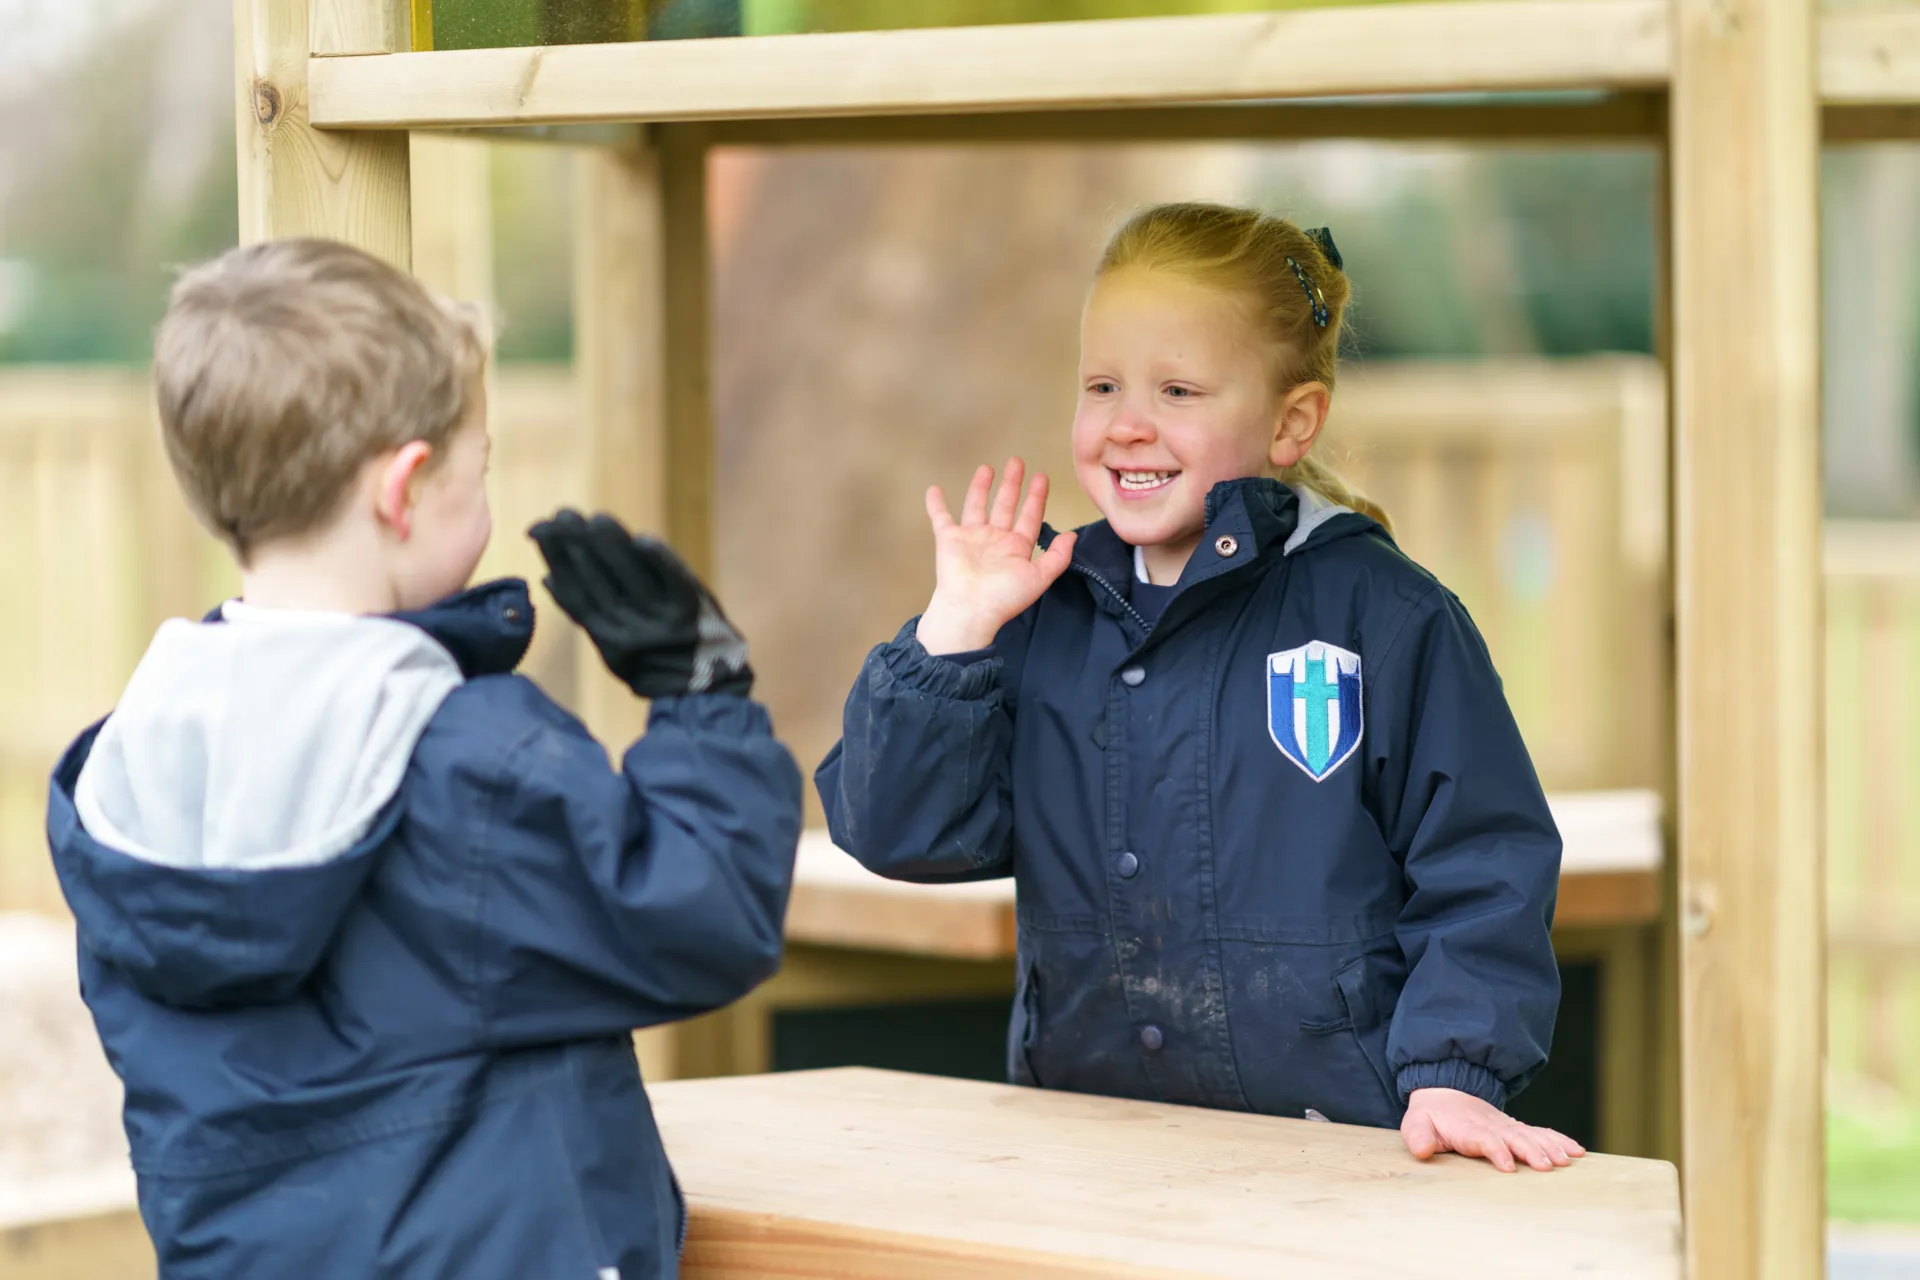 Come See our Brand New Outdoor Learning and Play Facility